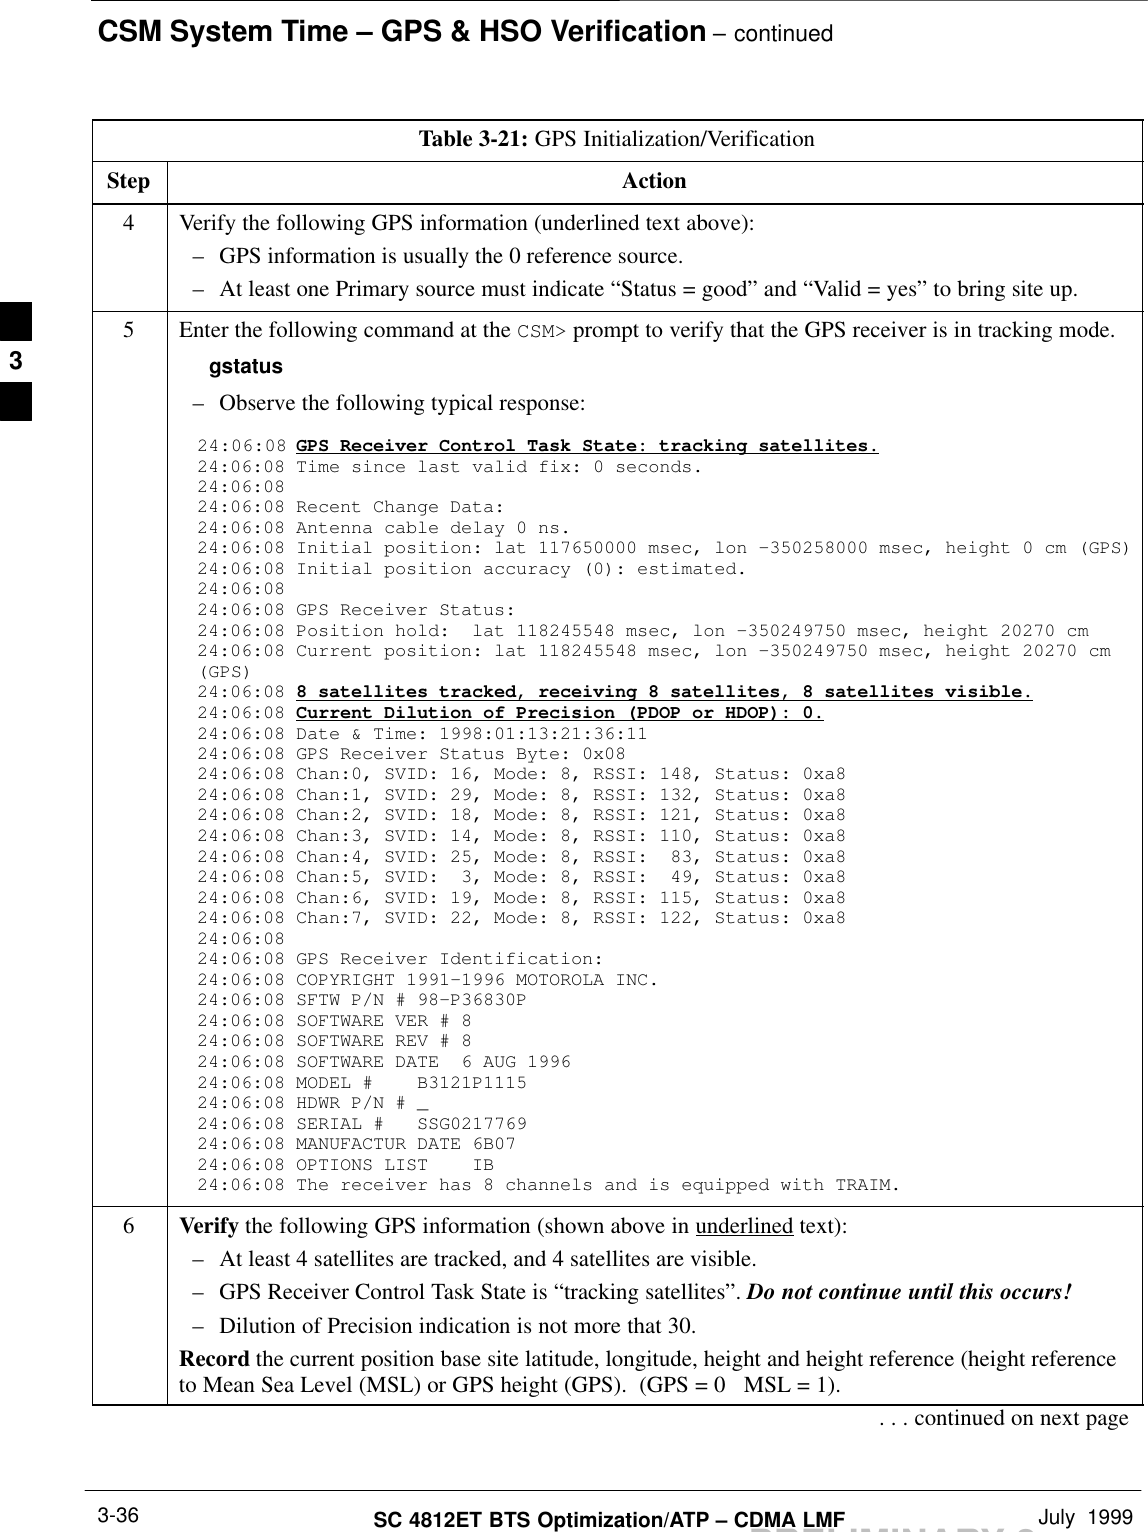 CSM System Time – GPS &amp; HSO Verification – continuedPRELIMINARY 2SC 4812ET BTS Optimization/ATP – CDMA LMF July  19993-36Table 3-21: GPS Initialization/VerificationStep Action4Verify the following GPS information (underlined text above):– GPS information is usually the 0 reference source.– At least one Primary source must indicate “Status = good” and “Valid = yes” to bring site up.5Enter the following command at the CSM&gt; prompt to verify that the GPS receiver is in tracking mode.gstatus– Observe the following typical response:24:06:08 GPS Receiver Control Task State: tracking satellites.24:06:08 Time since last valid fix: 0 seconds.24:06:08 24:06:08 Recent Change Data:24:06:08 Antenna cable delay 0 ns.24:06:08 Initial position: lat 117650000 msec, lon –350258000 msec, height 0 cm (GPS)24:06:08 Initial position accuracy (0): estimated.24:06:08 24:06:08 GPS Receiver Status:24:06:08 Position hold:  lat 118245548 msec, lon –350249750 msec, height 20270 cm24:06:08 Current position: lat 118245548 msec, lon –350249750 msec, height 20270 cm(GPS)24:06:08 8 satellites tracked, receiving 8 satellites, 8 satellites visible.24:06:08 Current Dilution of Precision (PDOP or HDOP): 0.24:06:08 Date &amp; Time: 1998:01:13:21:36:1124:06:08 GPS Receiver Status Byte: 0x0824:06:08 Chan:0, SVID: 16, Mode: 8, RSSI: 148, Status: 0xa824:06:08 Chan:1, SVID: 29, Mode: 8, RSSI: 132, Status: 0xa824:06:08 Chan:2, SVID: 18, Mode: 8, RSSI: 121, Status: 0xa824:06:08 Chan:3, SVID: 14, Mode: 8, RSSI: 110, Status: 0xa824:06:08 Chan:4, SVID: 25, Mode: 8, RSSI:  83, Status: 0xa824:06:08 Chan:5, SVID:  3, Mode: 8, RSSI:  49, Status: 0xa824:06:08 Chan:6, SVID: 19, Mode: 8, RSSI: 115, Status: 0xa824:06:08 Chan:7, SVID: 22, Mode: 8, RSSI: 122, Status: 0xa824:06:08 24:06:08 GPS Receiver Identification:24:06:08 COPYRIGHT 1991–1996 MOTOROLA INC. 24:06:08 SFTW P/N # 98–P36830P      24:06:08 SOFTWARE VER # 8           24:06:08 SOFTWARE REV # 8           24:06:08 SOFTWARE DATE  6 AUG 1996 24:06:08 MODEL #    B3121P1115      24:06:08 HDWR P/N # _               24:06:08 SERIAL #   SSG0217769      24:06:08 MANUFACTUR DATE 6B07       24:06:08 OPTIONS LIST    IB        24:06:08 The receiver has 8 channels and is equipped with TRAIM.6Verify the following GPS information (shown above in underlined text):– At least 4 satellites are tracked, and 4 satellites are visible.– GPS Receiver Control Task State is “tracking satellites”. Do not continue until this occurs!– Dilution of Precision indication is not more that 30.Record the current position base site latitude, longitude, height and height reference (height referenceto Mean Sea Level (MSL) or GPS height (GPS).  (GPS = 0   MSL = 1).. . . continued on next page3